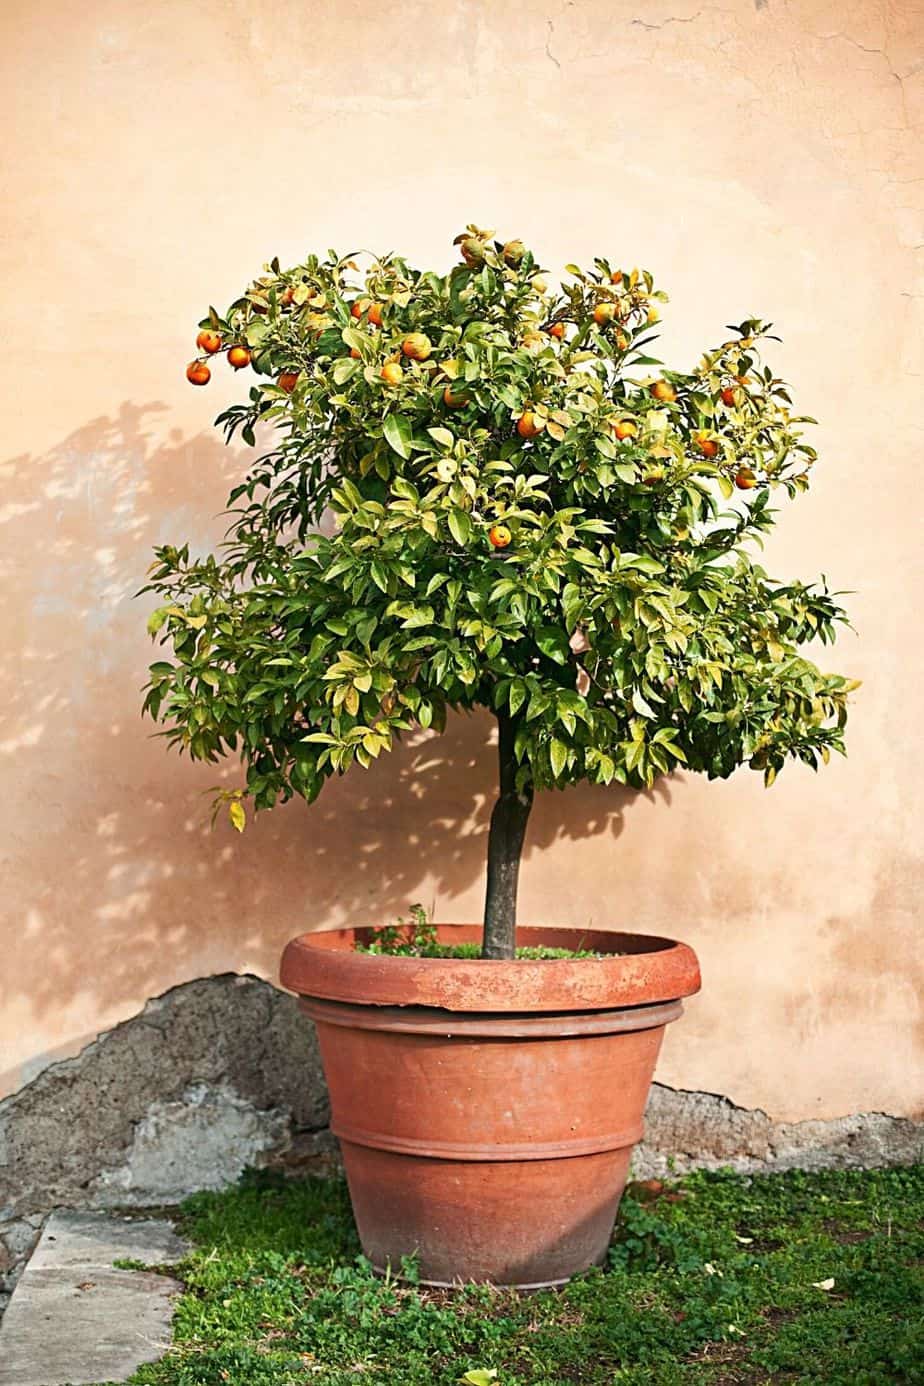 Citrus Trees can be grown indoors, and are best placed in southwest-facing windows